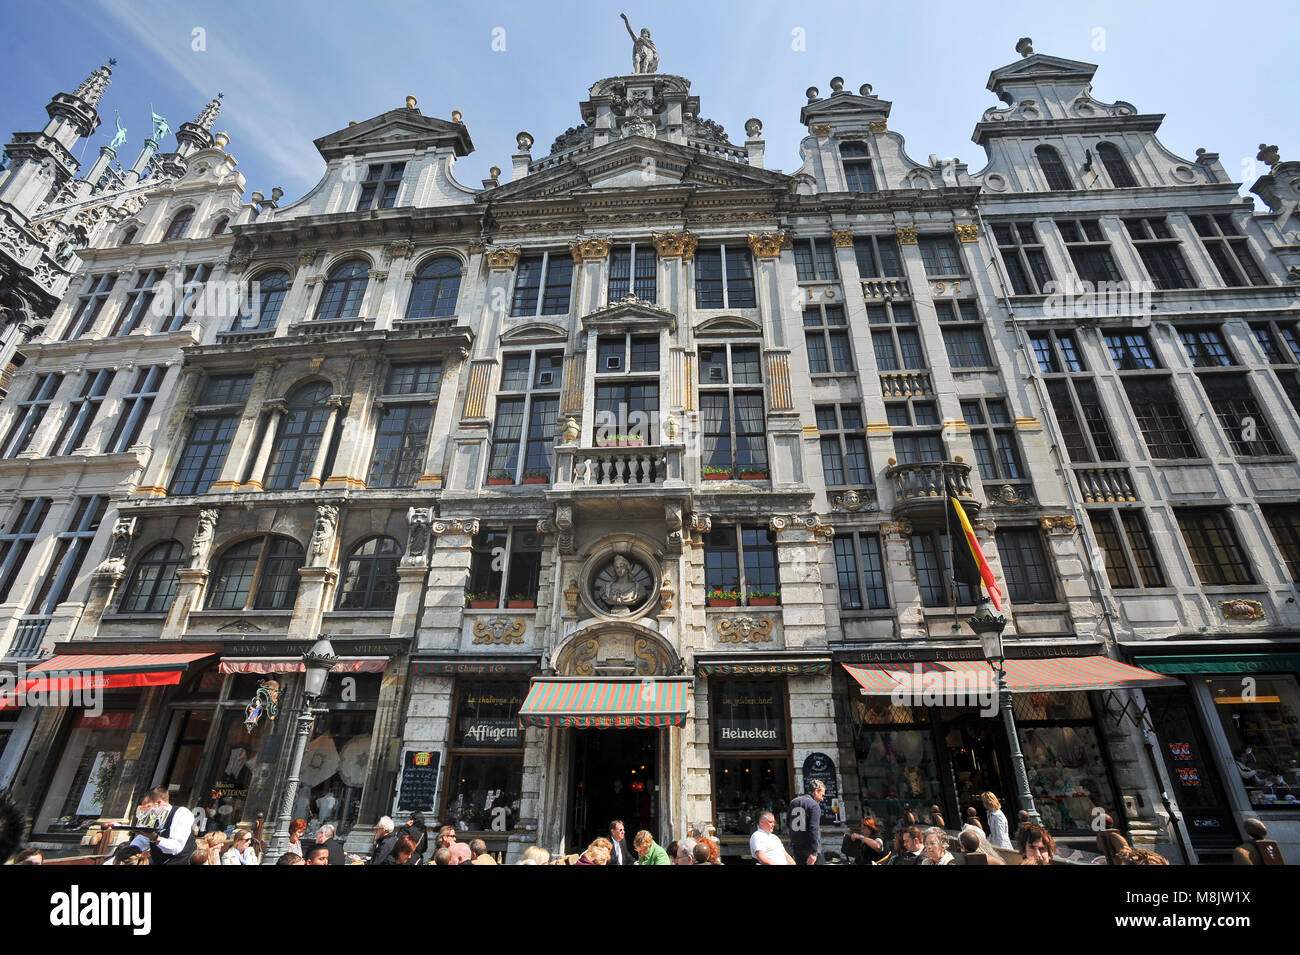 Italian Baroque houses Le Cerf, Joseph et Anne, L'Ange, La Chaloupe d'or, Le Pigeon and Le Marchand d'or from XVII century on Grand Place (Grand Squar Stock Photo